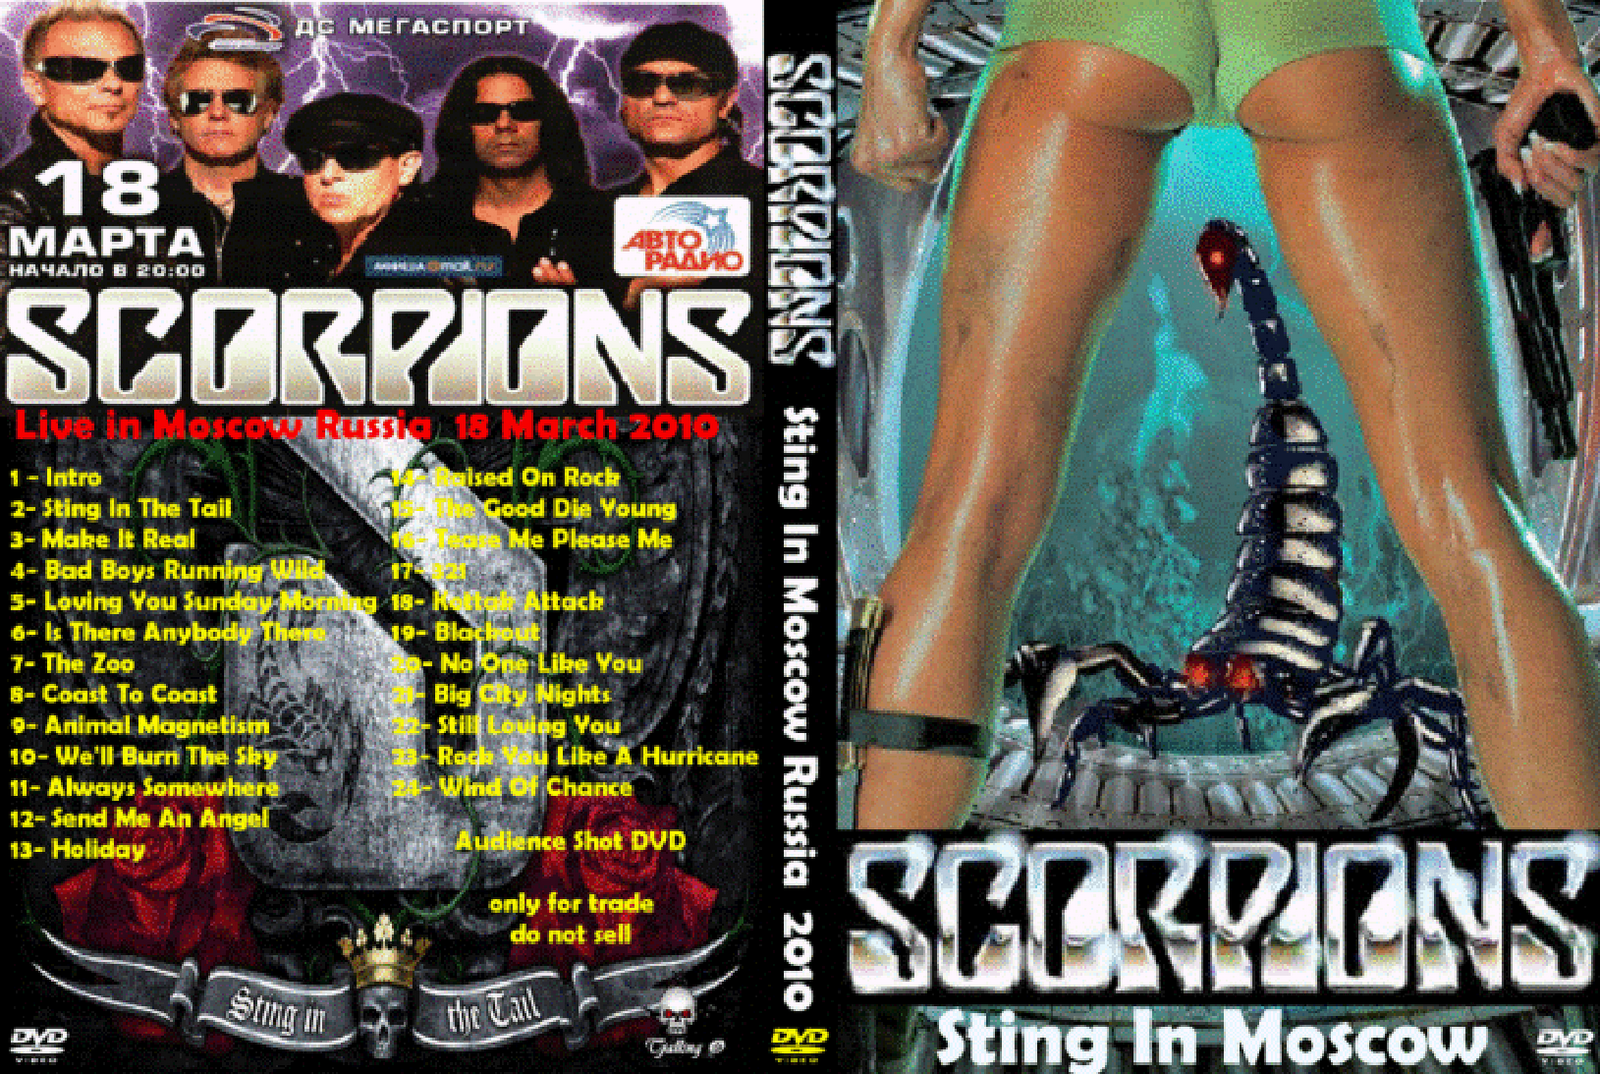 http://3.bp.blogspot.com/-l7nPZX401qw/TZzaRAJvxnI/AAAAAAAACcA/sLYOdUvvopg/s1600/DVD+Cover+-+Scorpions+-+2010+-+Live+in+Moscow.png